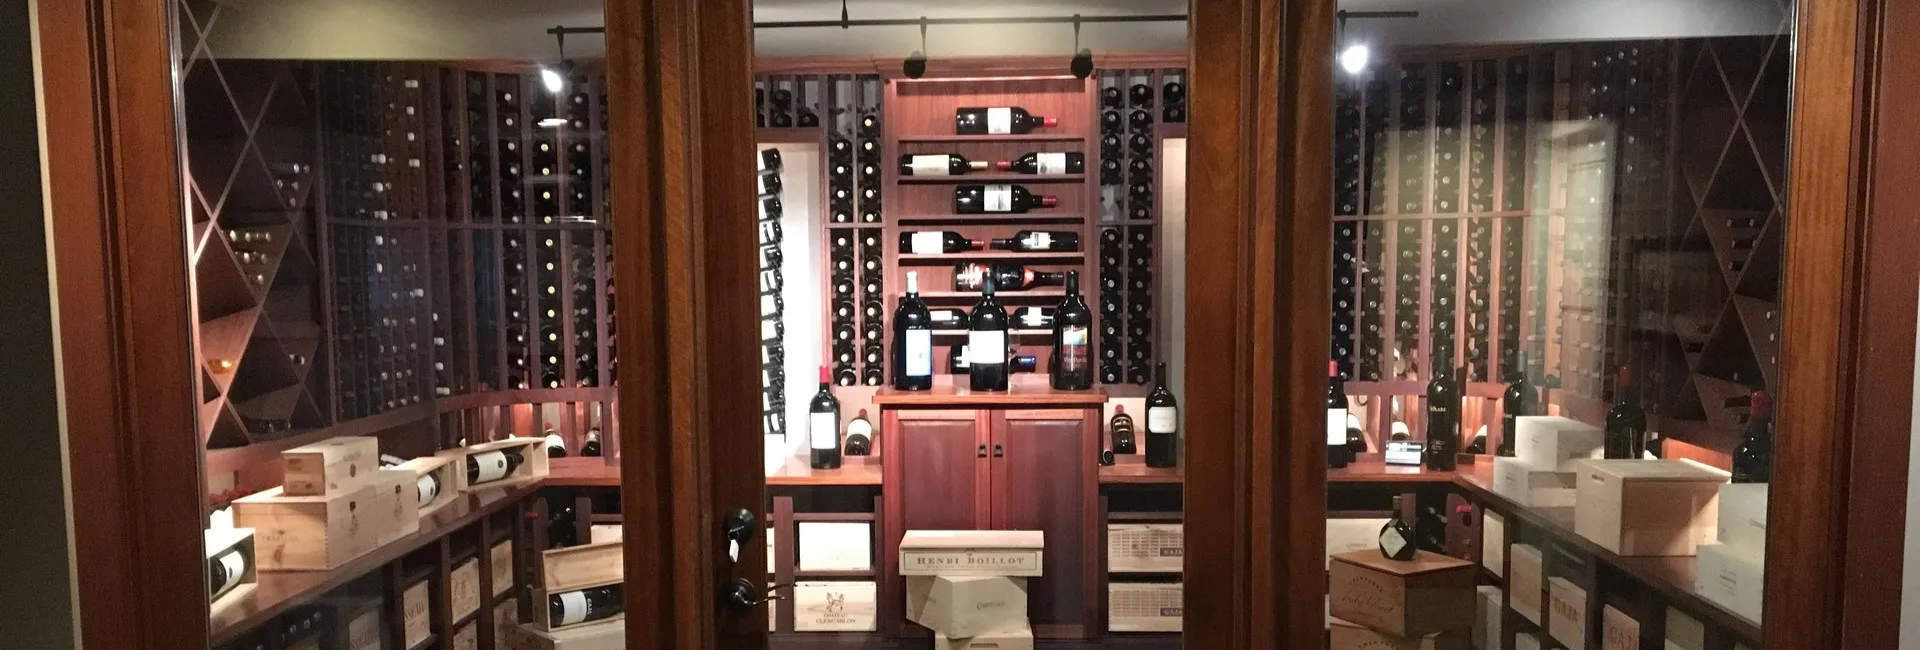 Impress your friends and clients with a custom wine cellar from Vintage Makers.